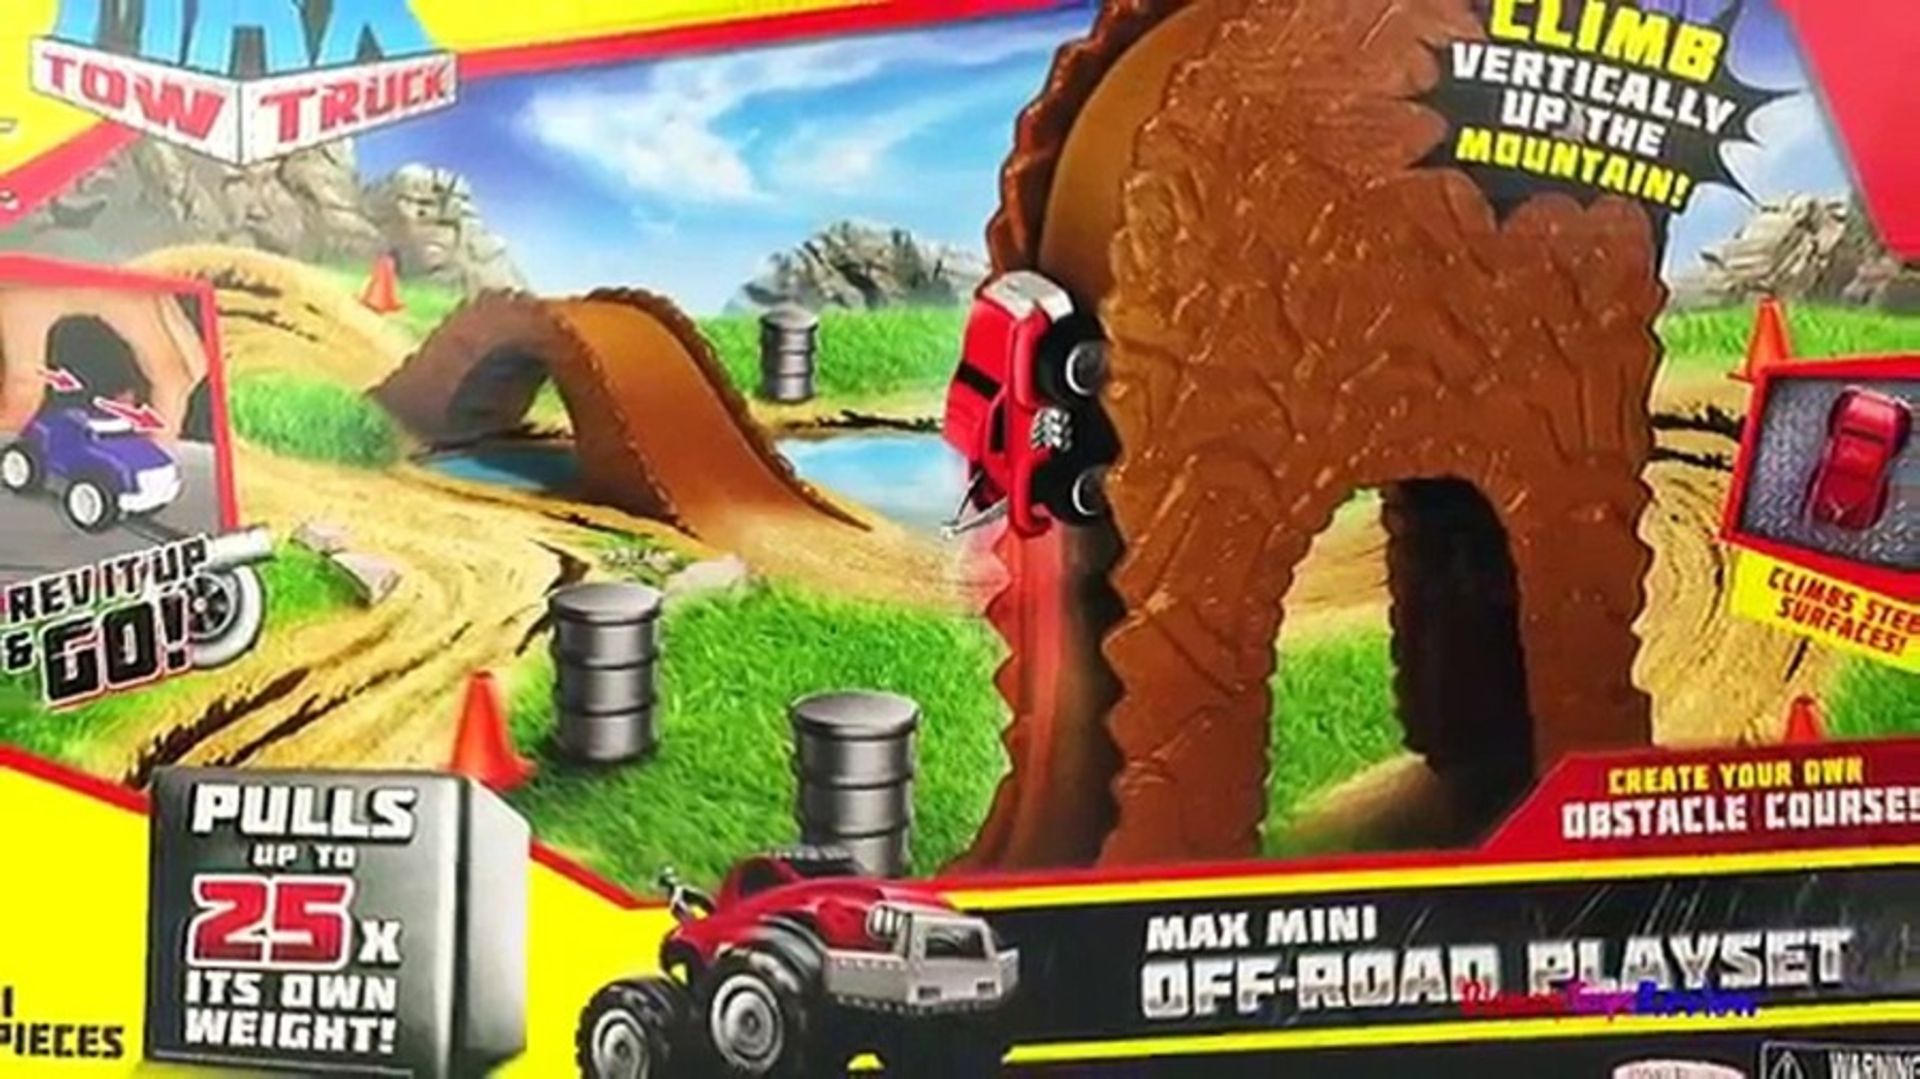 1 BRAND NEW BOXED MAX MINI OFF-ROAD PLAYSET / RRP £49.25 (VIEWING HIGHLY RECOMMENDED)